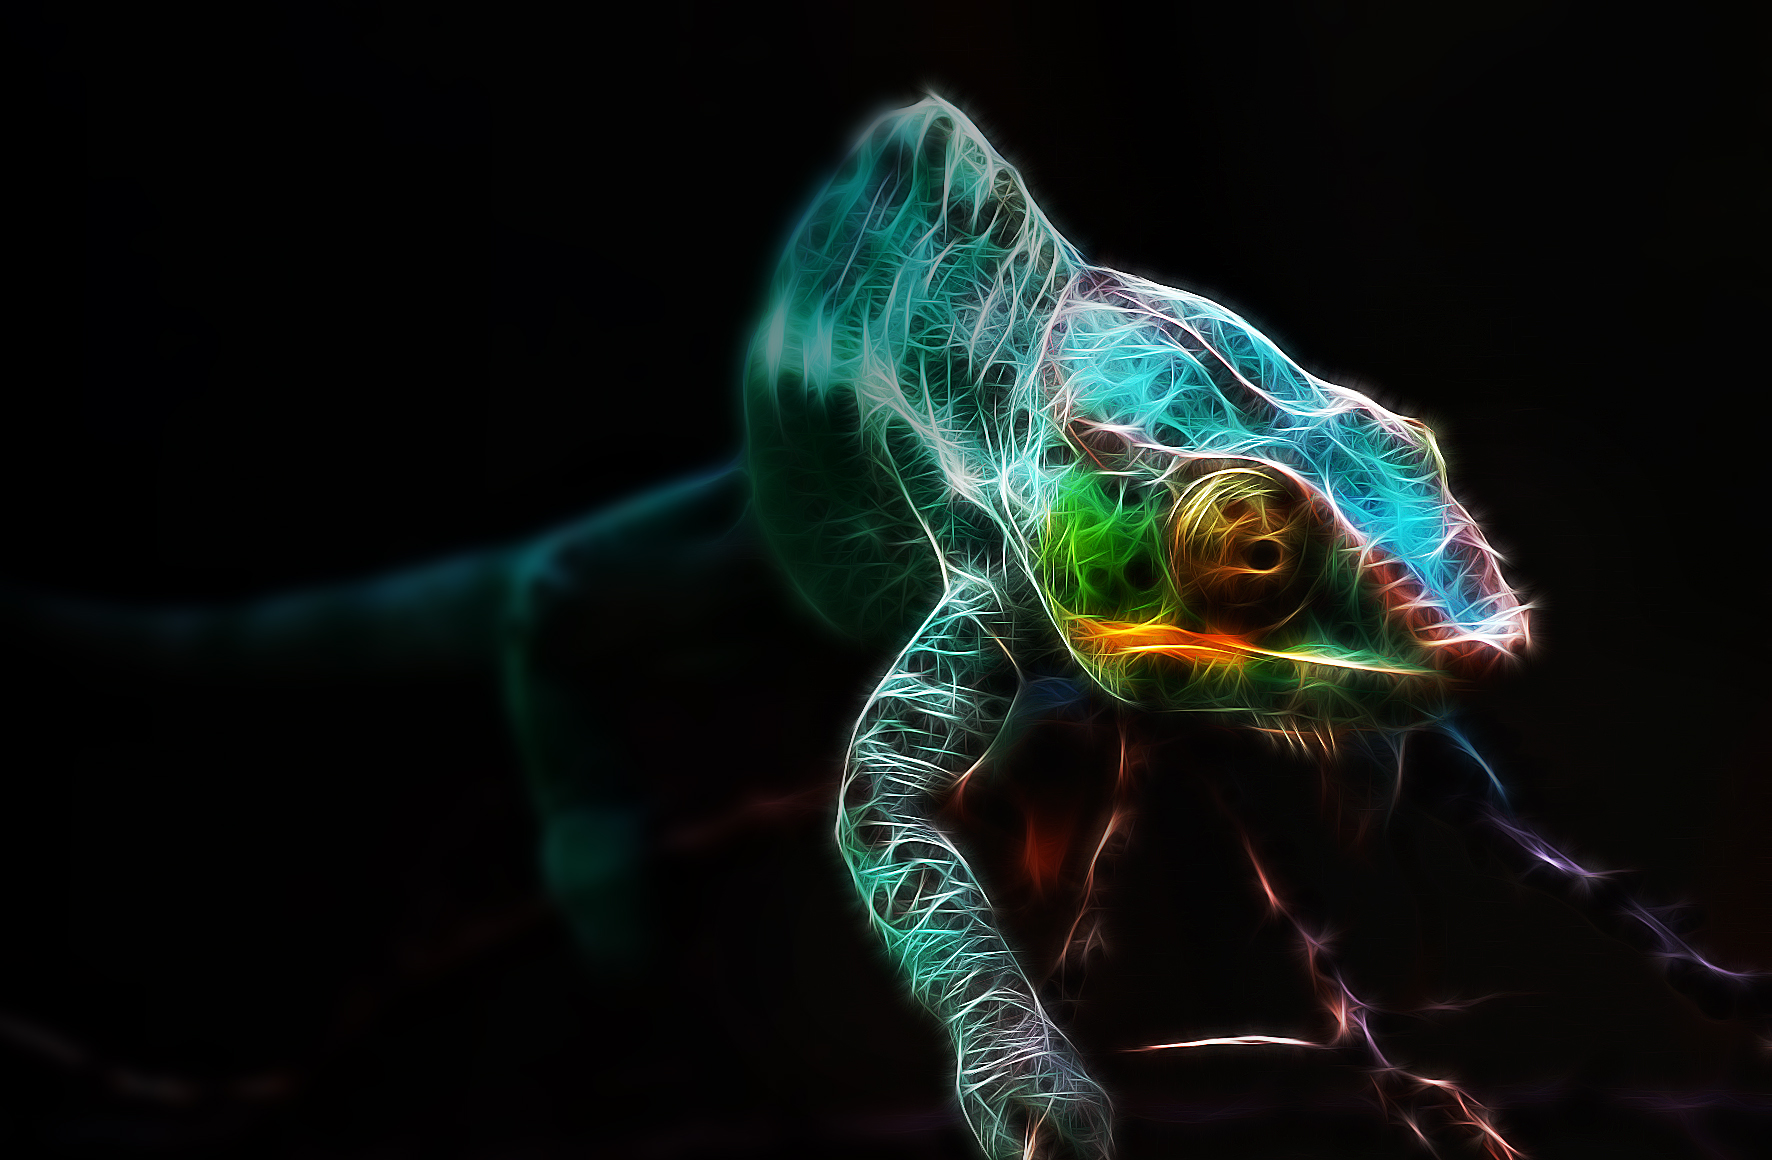 Fractalius Panther Chameleon by Sand Rae